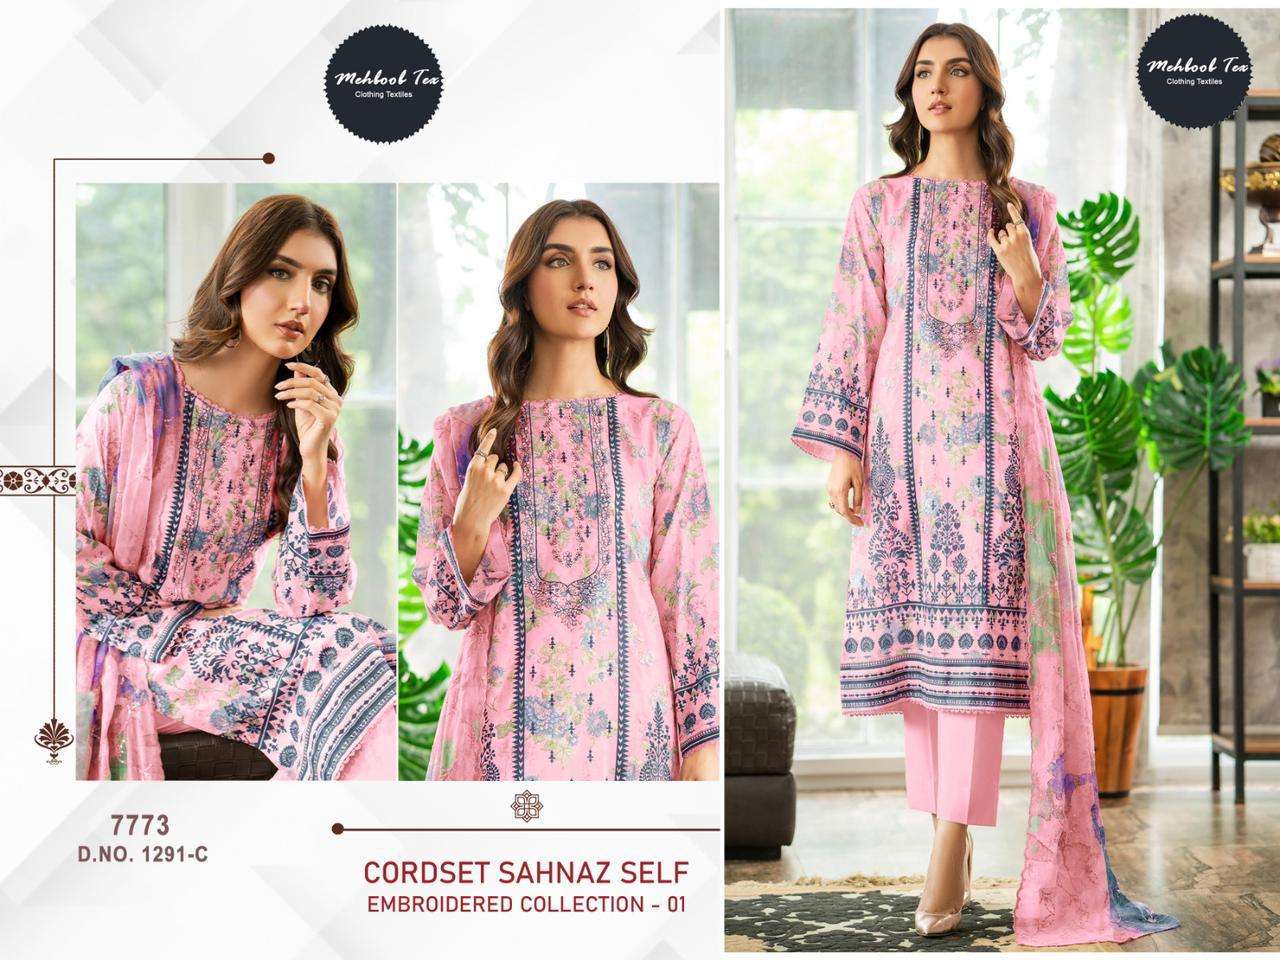 MEHBOOB TEX CORD SET SAHNAZ EMBROIDERED COLLECTION VOL 1